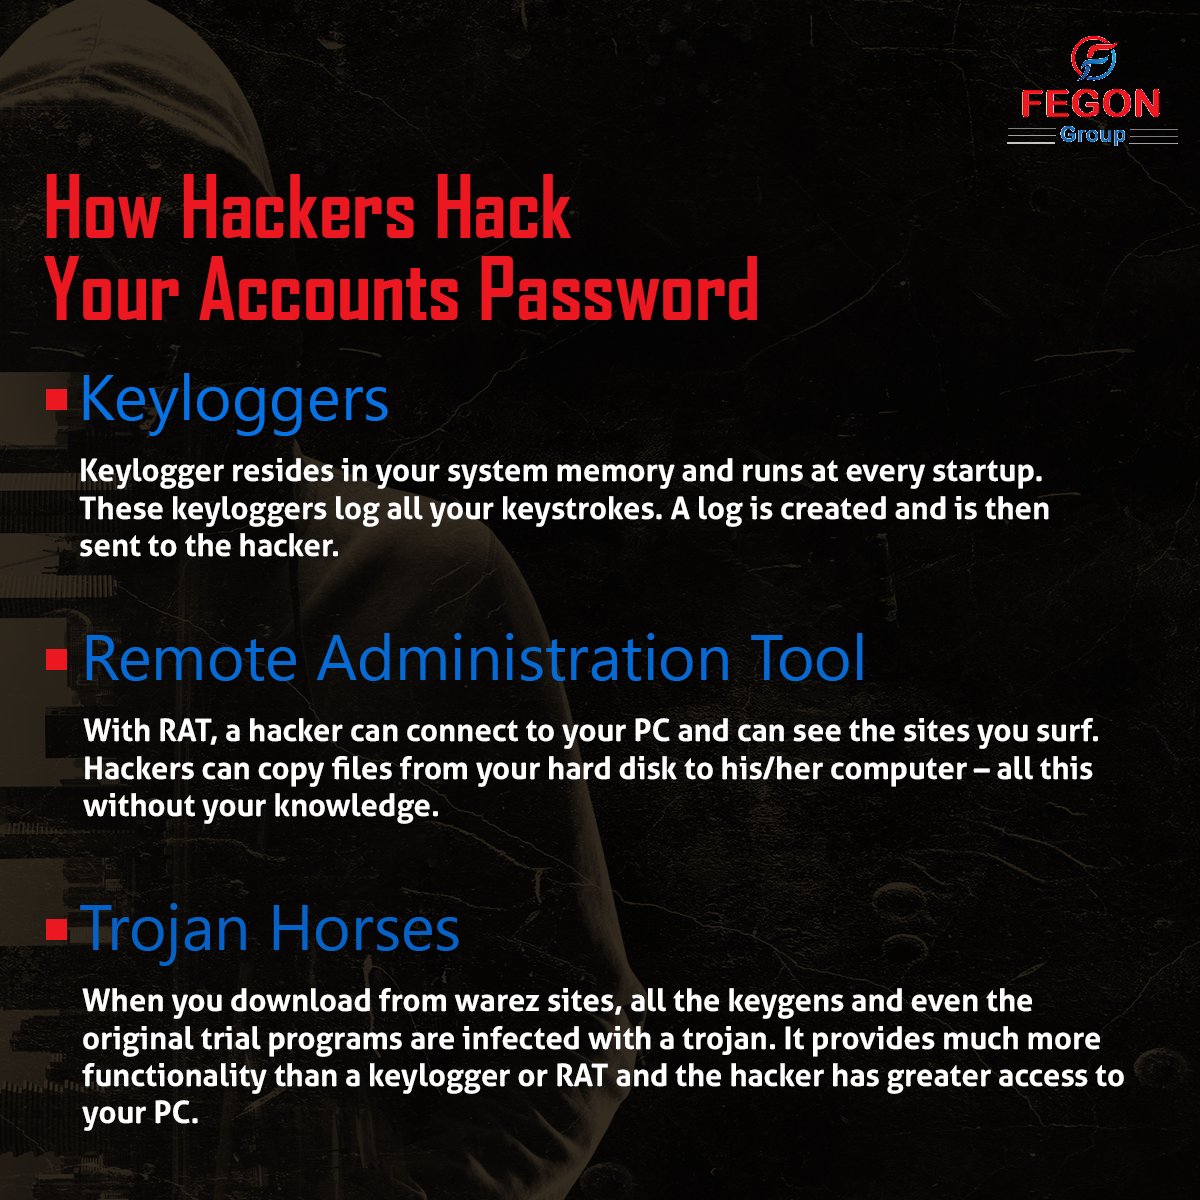 3 ways through which hackers can steal your passwords.😈
Secure your devices by installing an antivirus now!
To know more: bit.ly/2OJNGEk
#datasecurity #informationsecurity #onlinesafety #antivirus #dataprivacy #devicesafety #internet #virus #protection #WorkFromHome